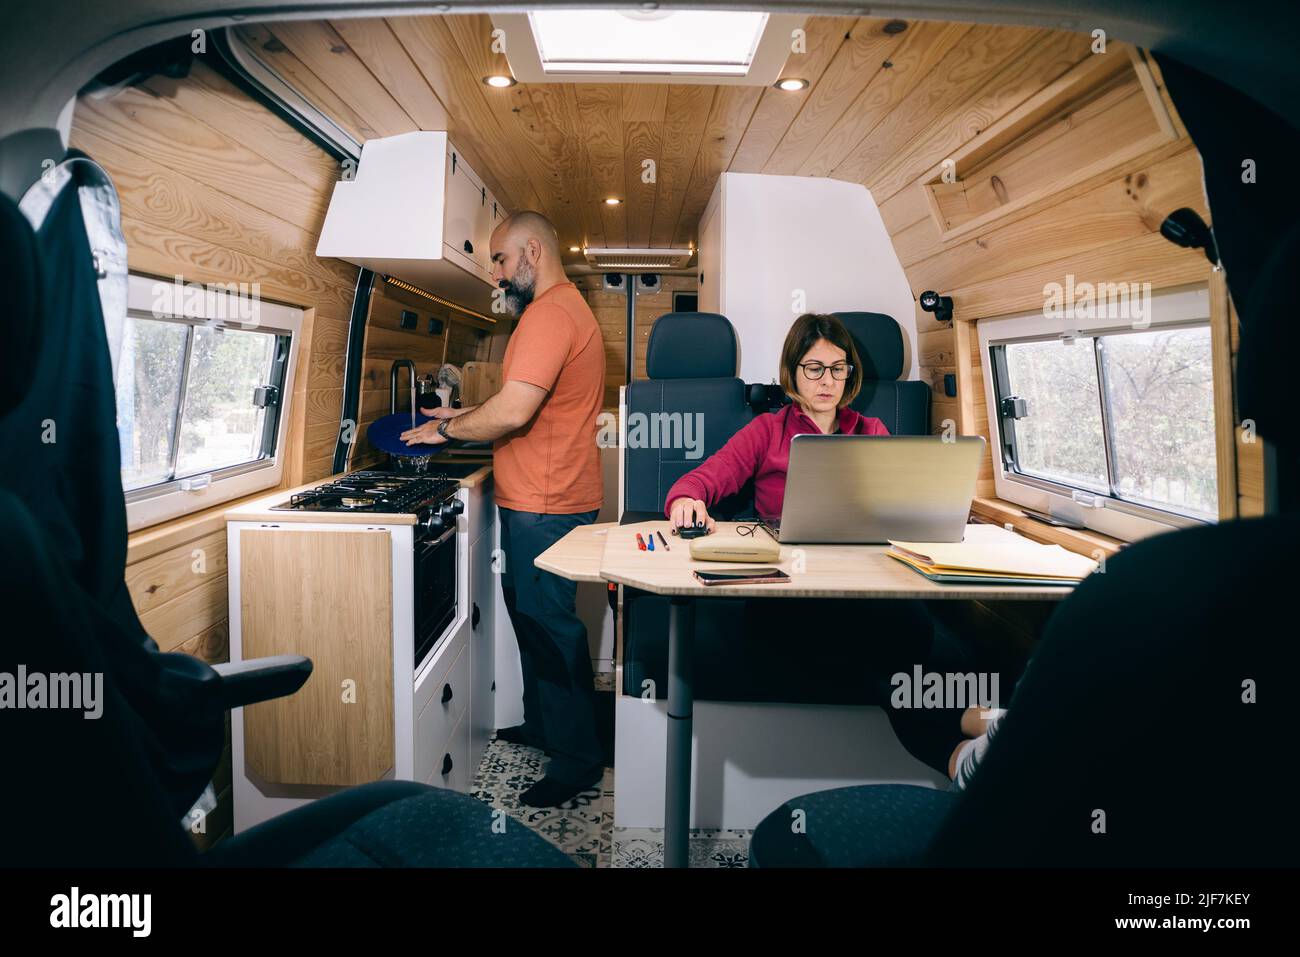 Couple living in a camper van. Woman teleworking. Man washing dishes. Stock Photo